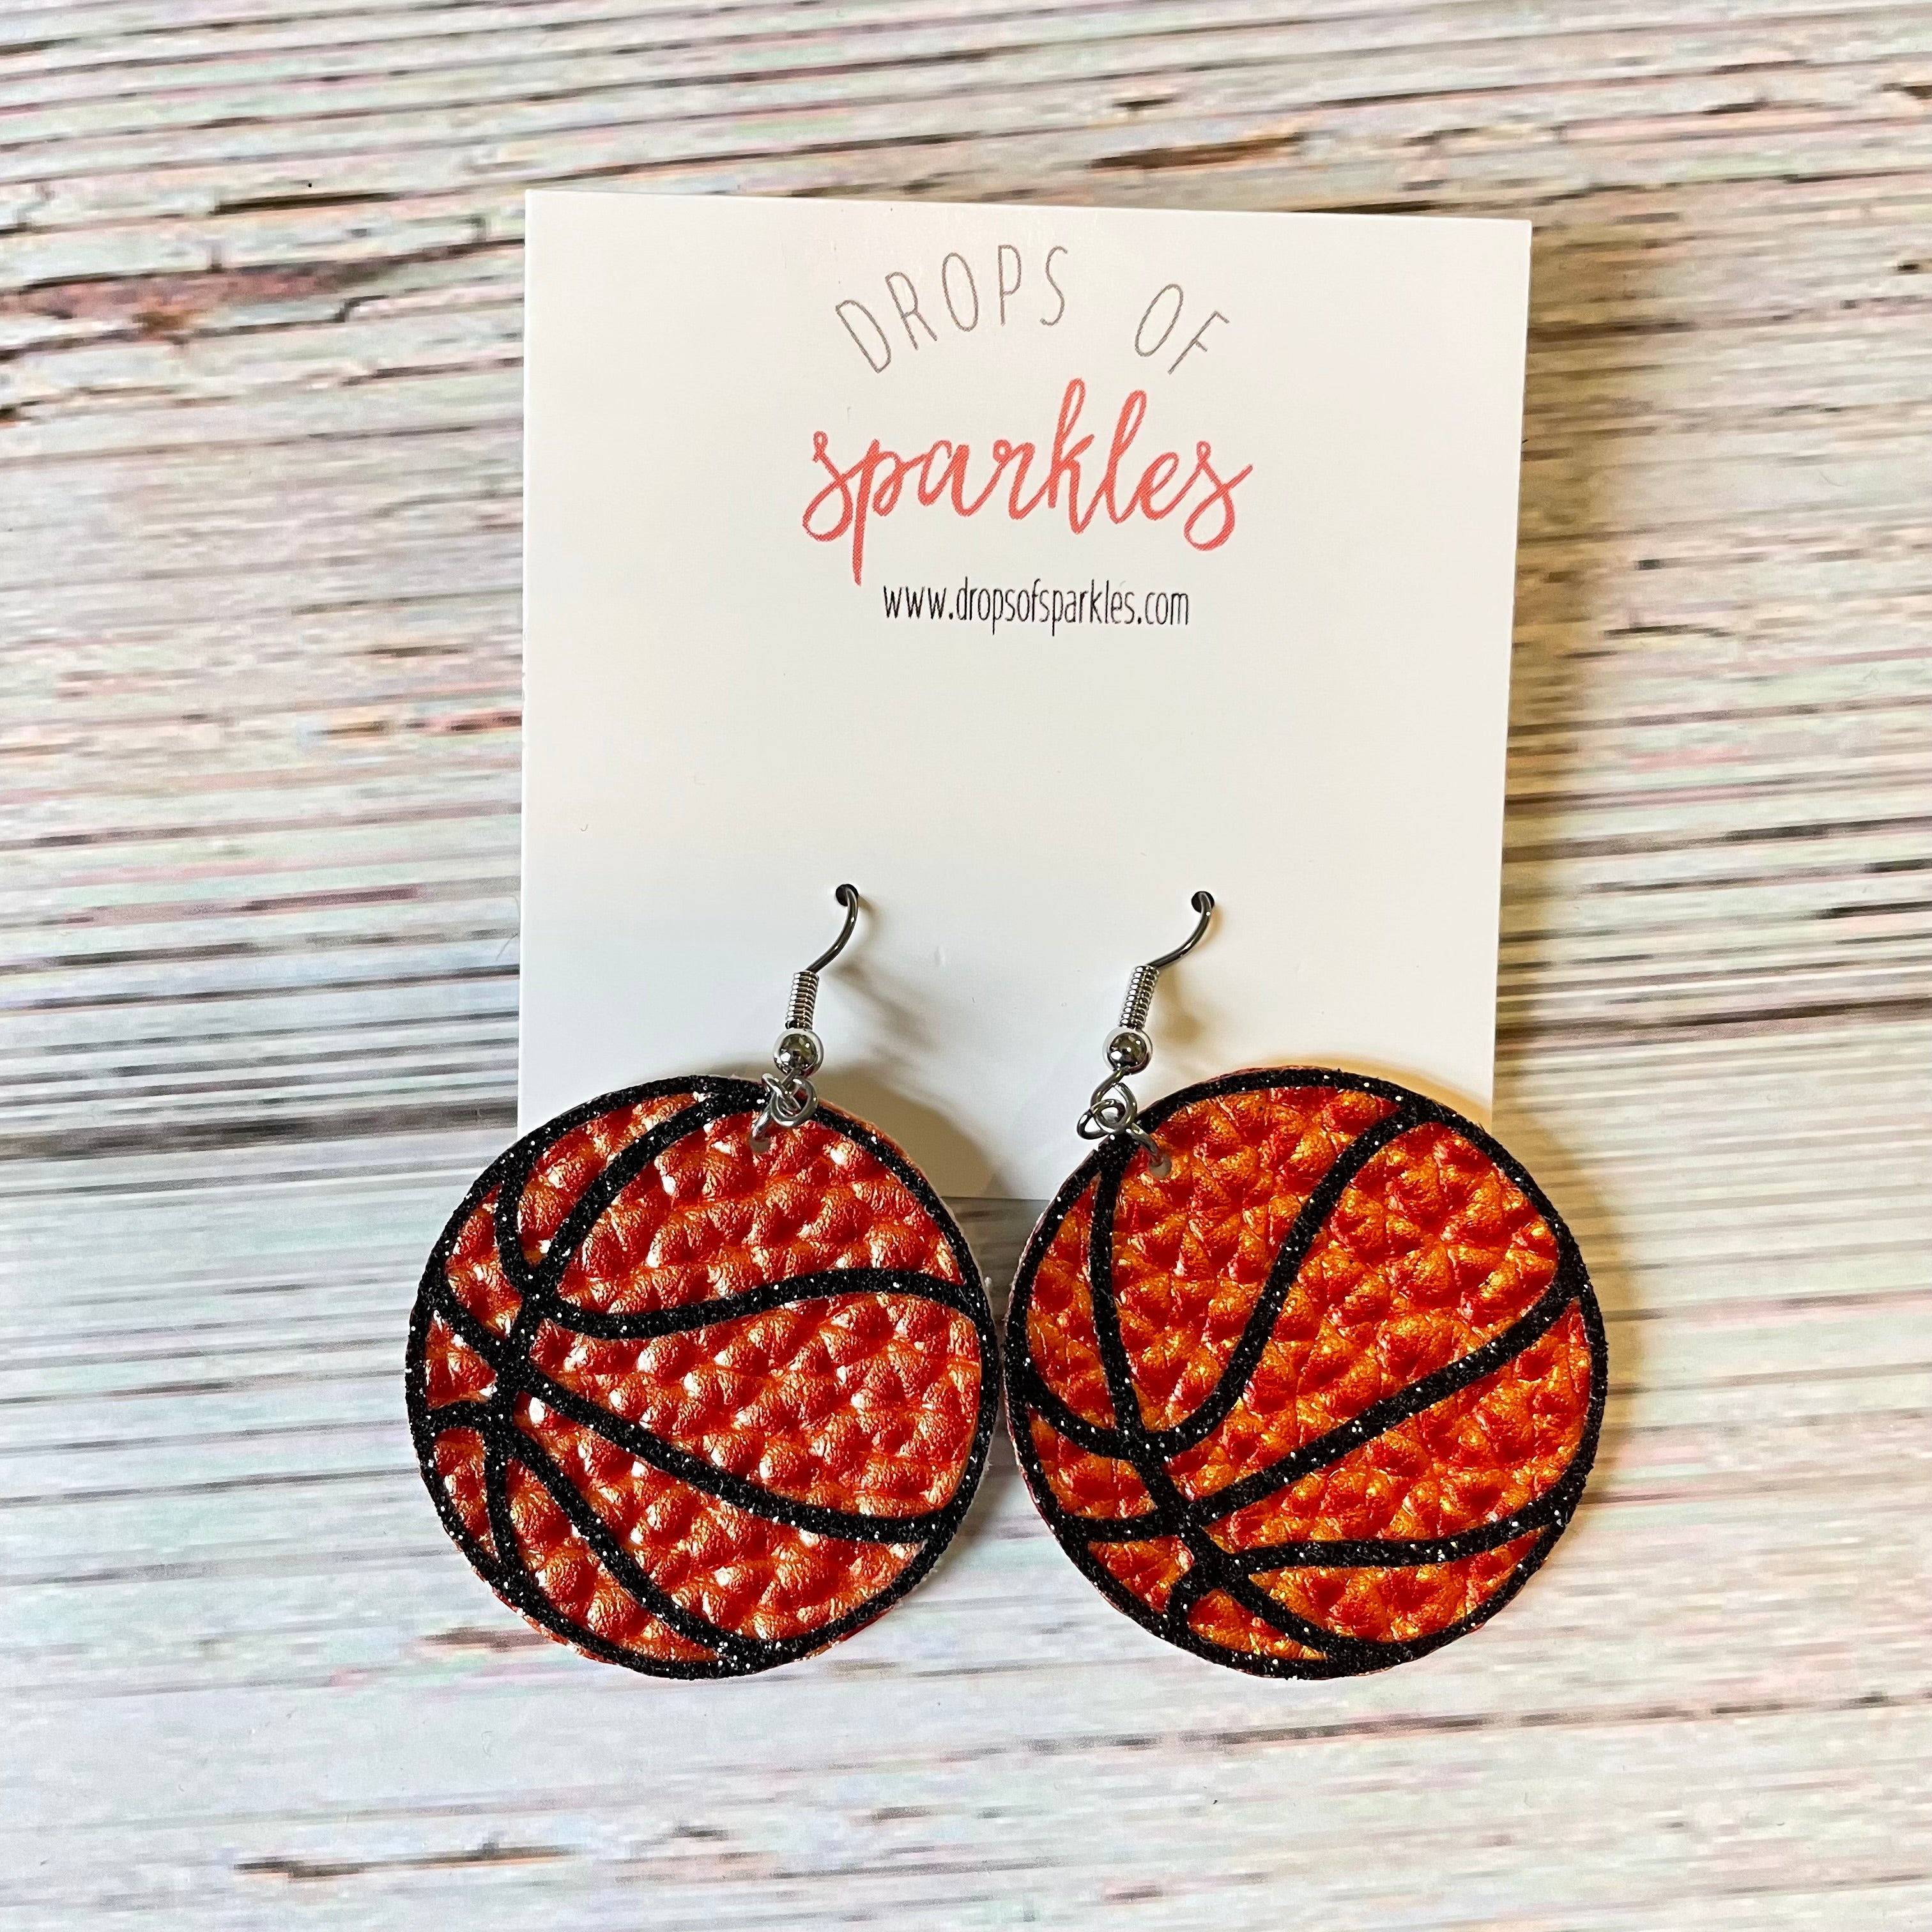 DIY Leather Earrings with a Cricut Maker - Semigloss Design